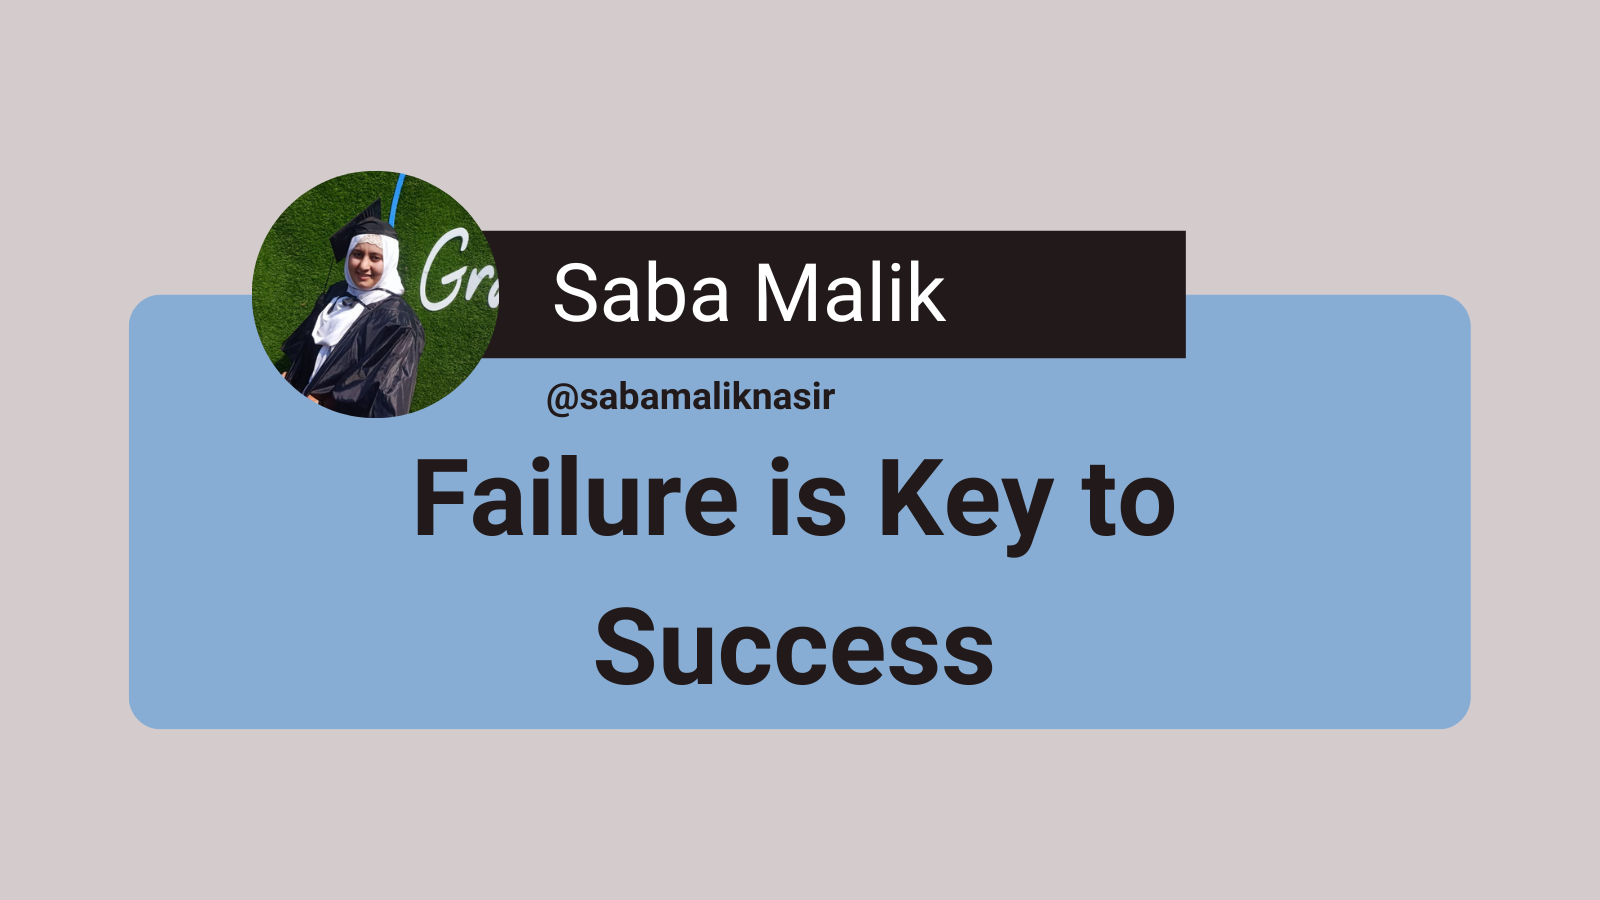 Failure is Key to Success